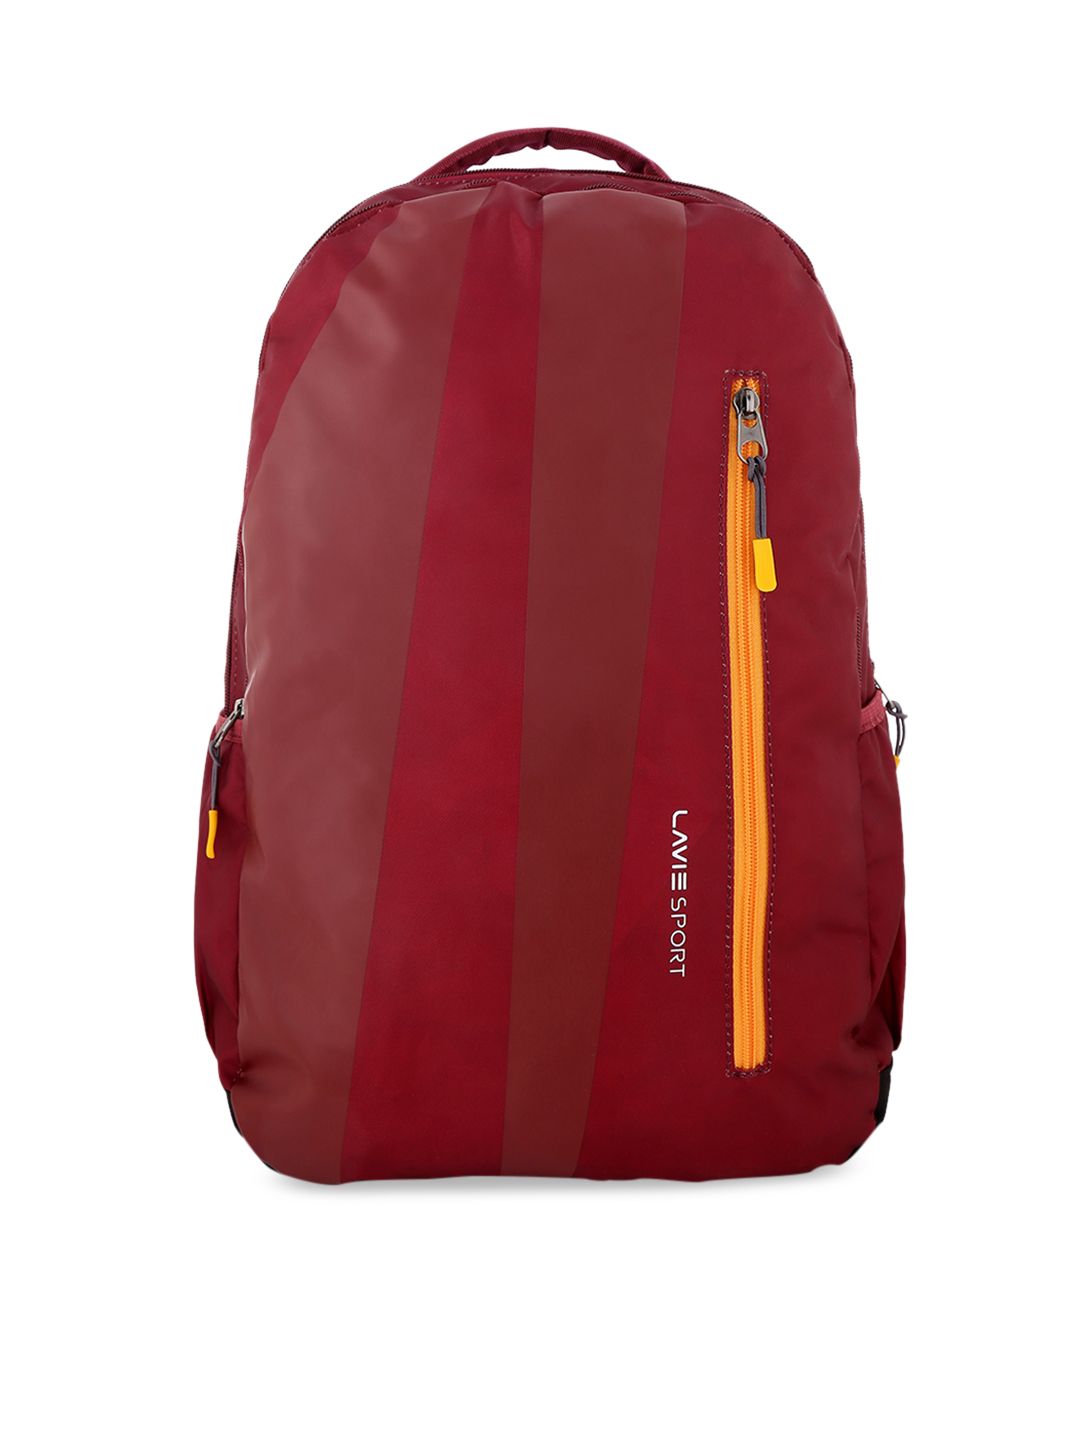 LAVIE SPORT Unisex Red Solid Laptop Backpack Price in India